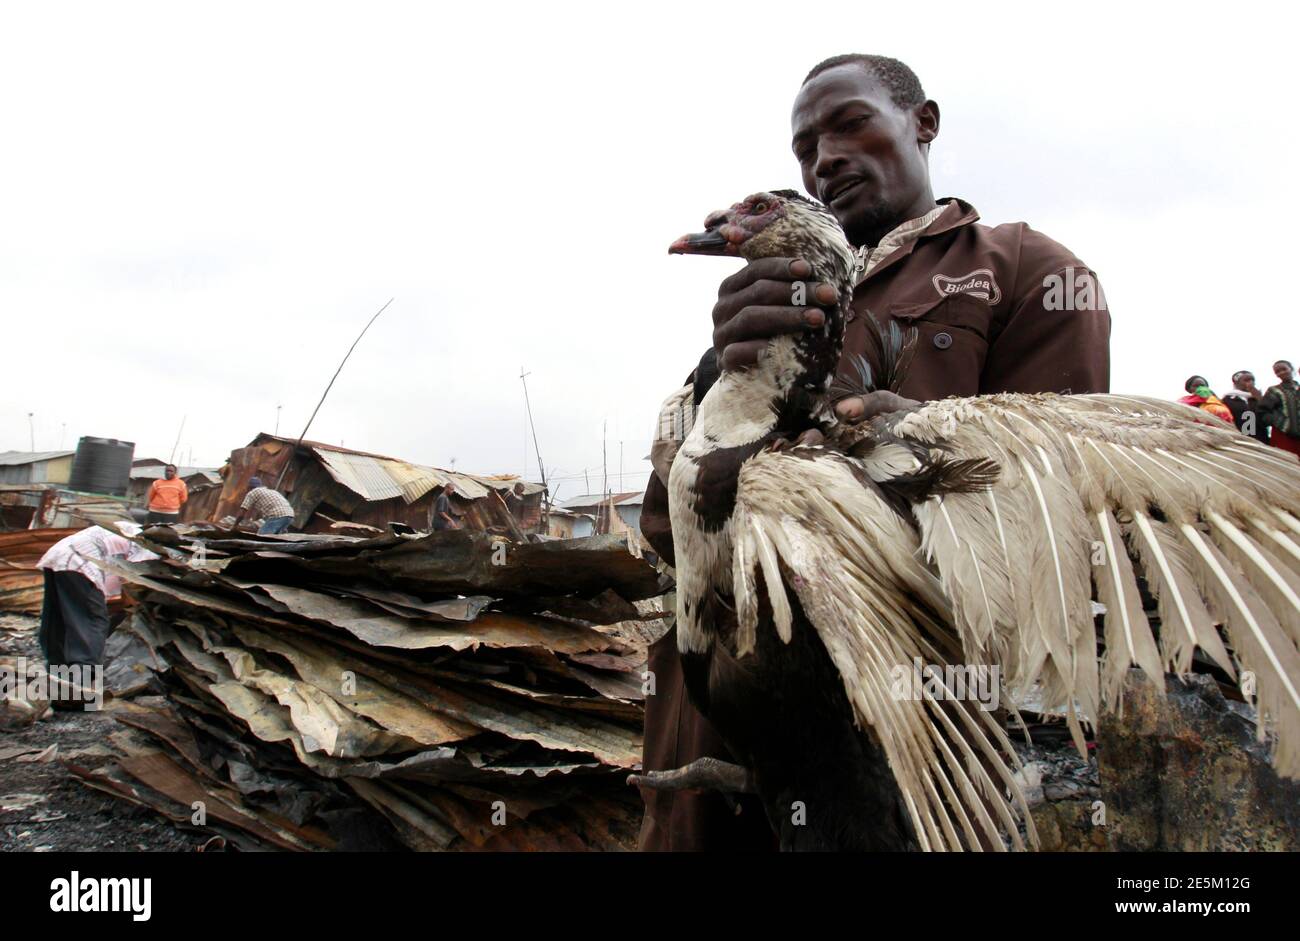 A resident rescues his duck that was injured in a fire outbreak at the Sinai slum in the industrial area of Kenya's capital Nairobi September 13, 2011. At least 75 bodies have been recovered after petrol that had spilled into an open sewer caught fire and sent a wave of flame through a densely populated slum in the Kenyan capital, police said on Monday. REUTERS/Thomas Mukoya (KENYA - Tags: SOCIETY DISASTER ANIMALS TPX IMAGES OF THE DAY) Stock Photo